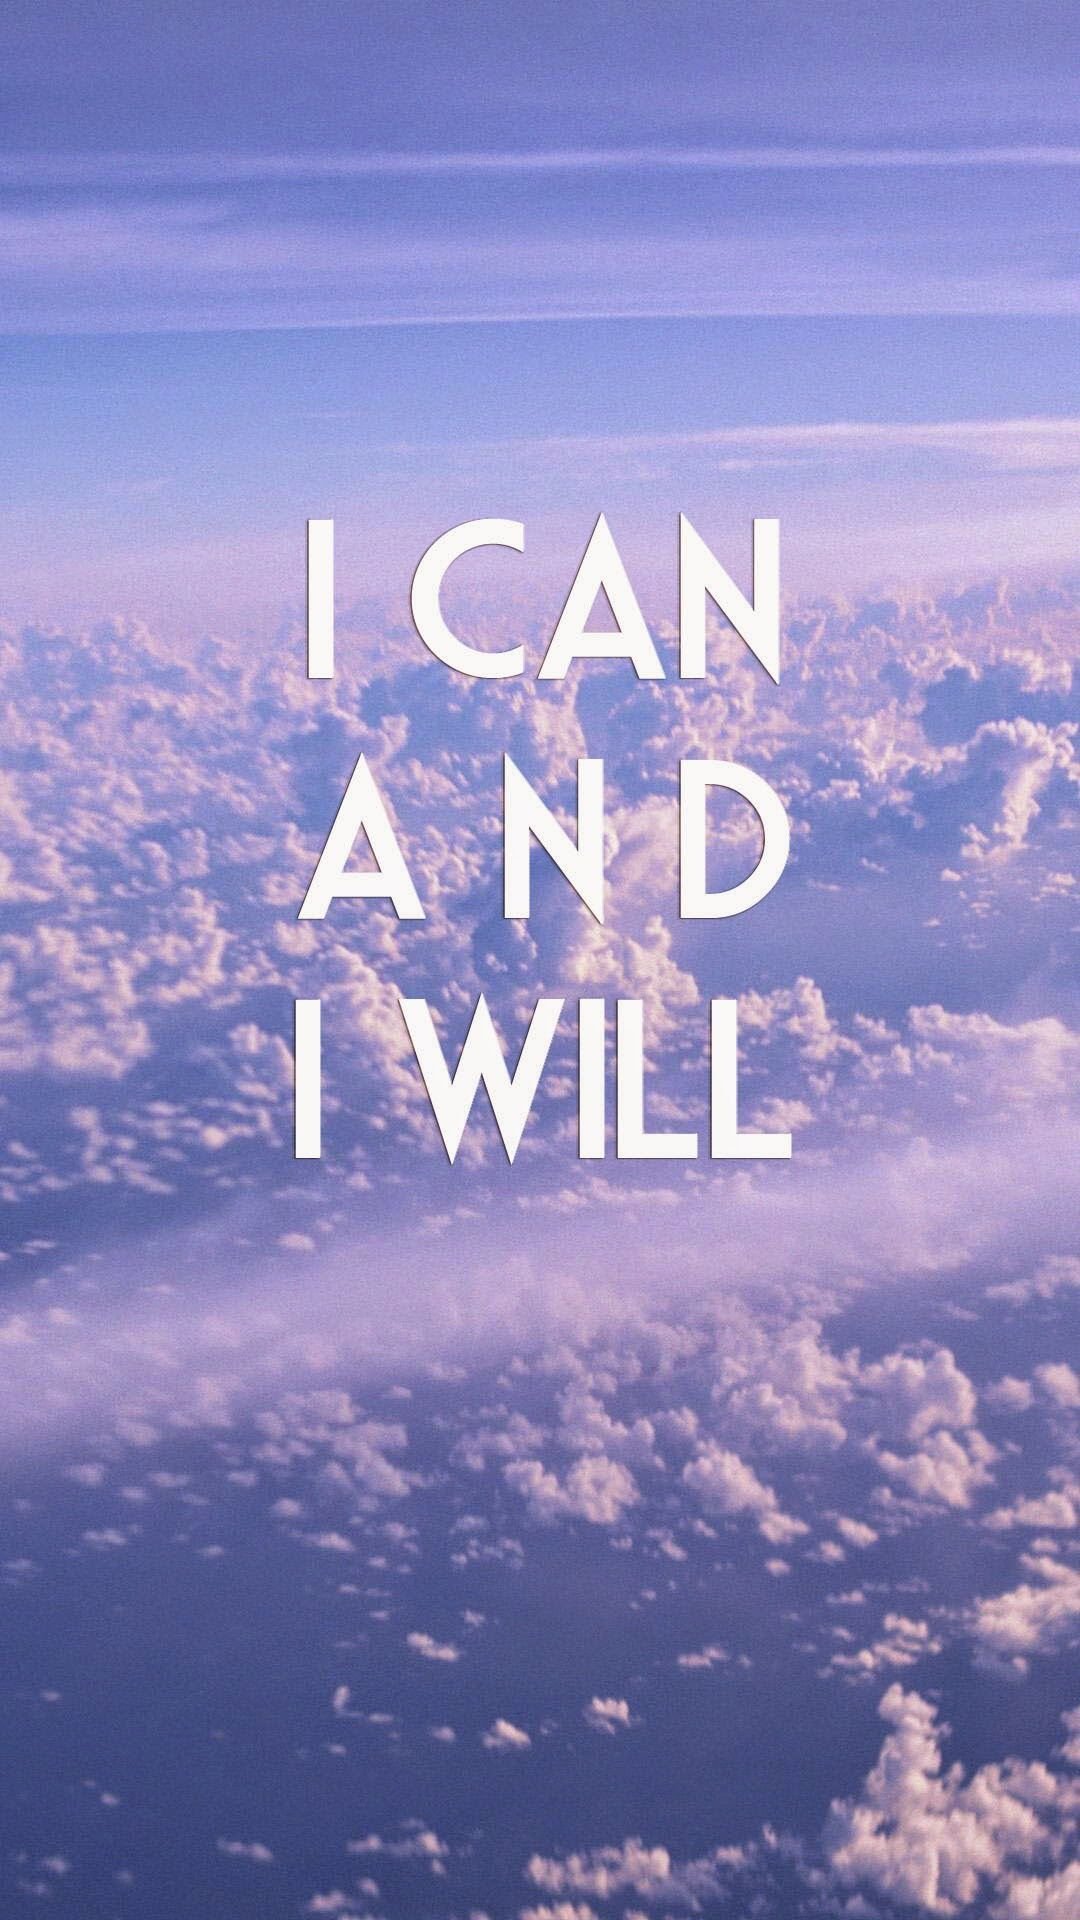 Motivational - i can and i will